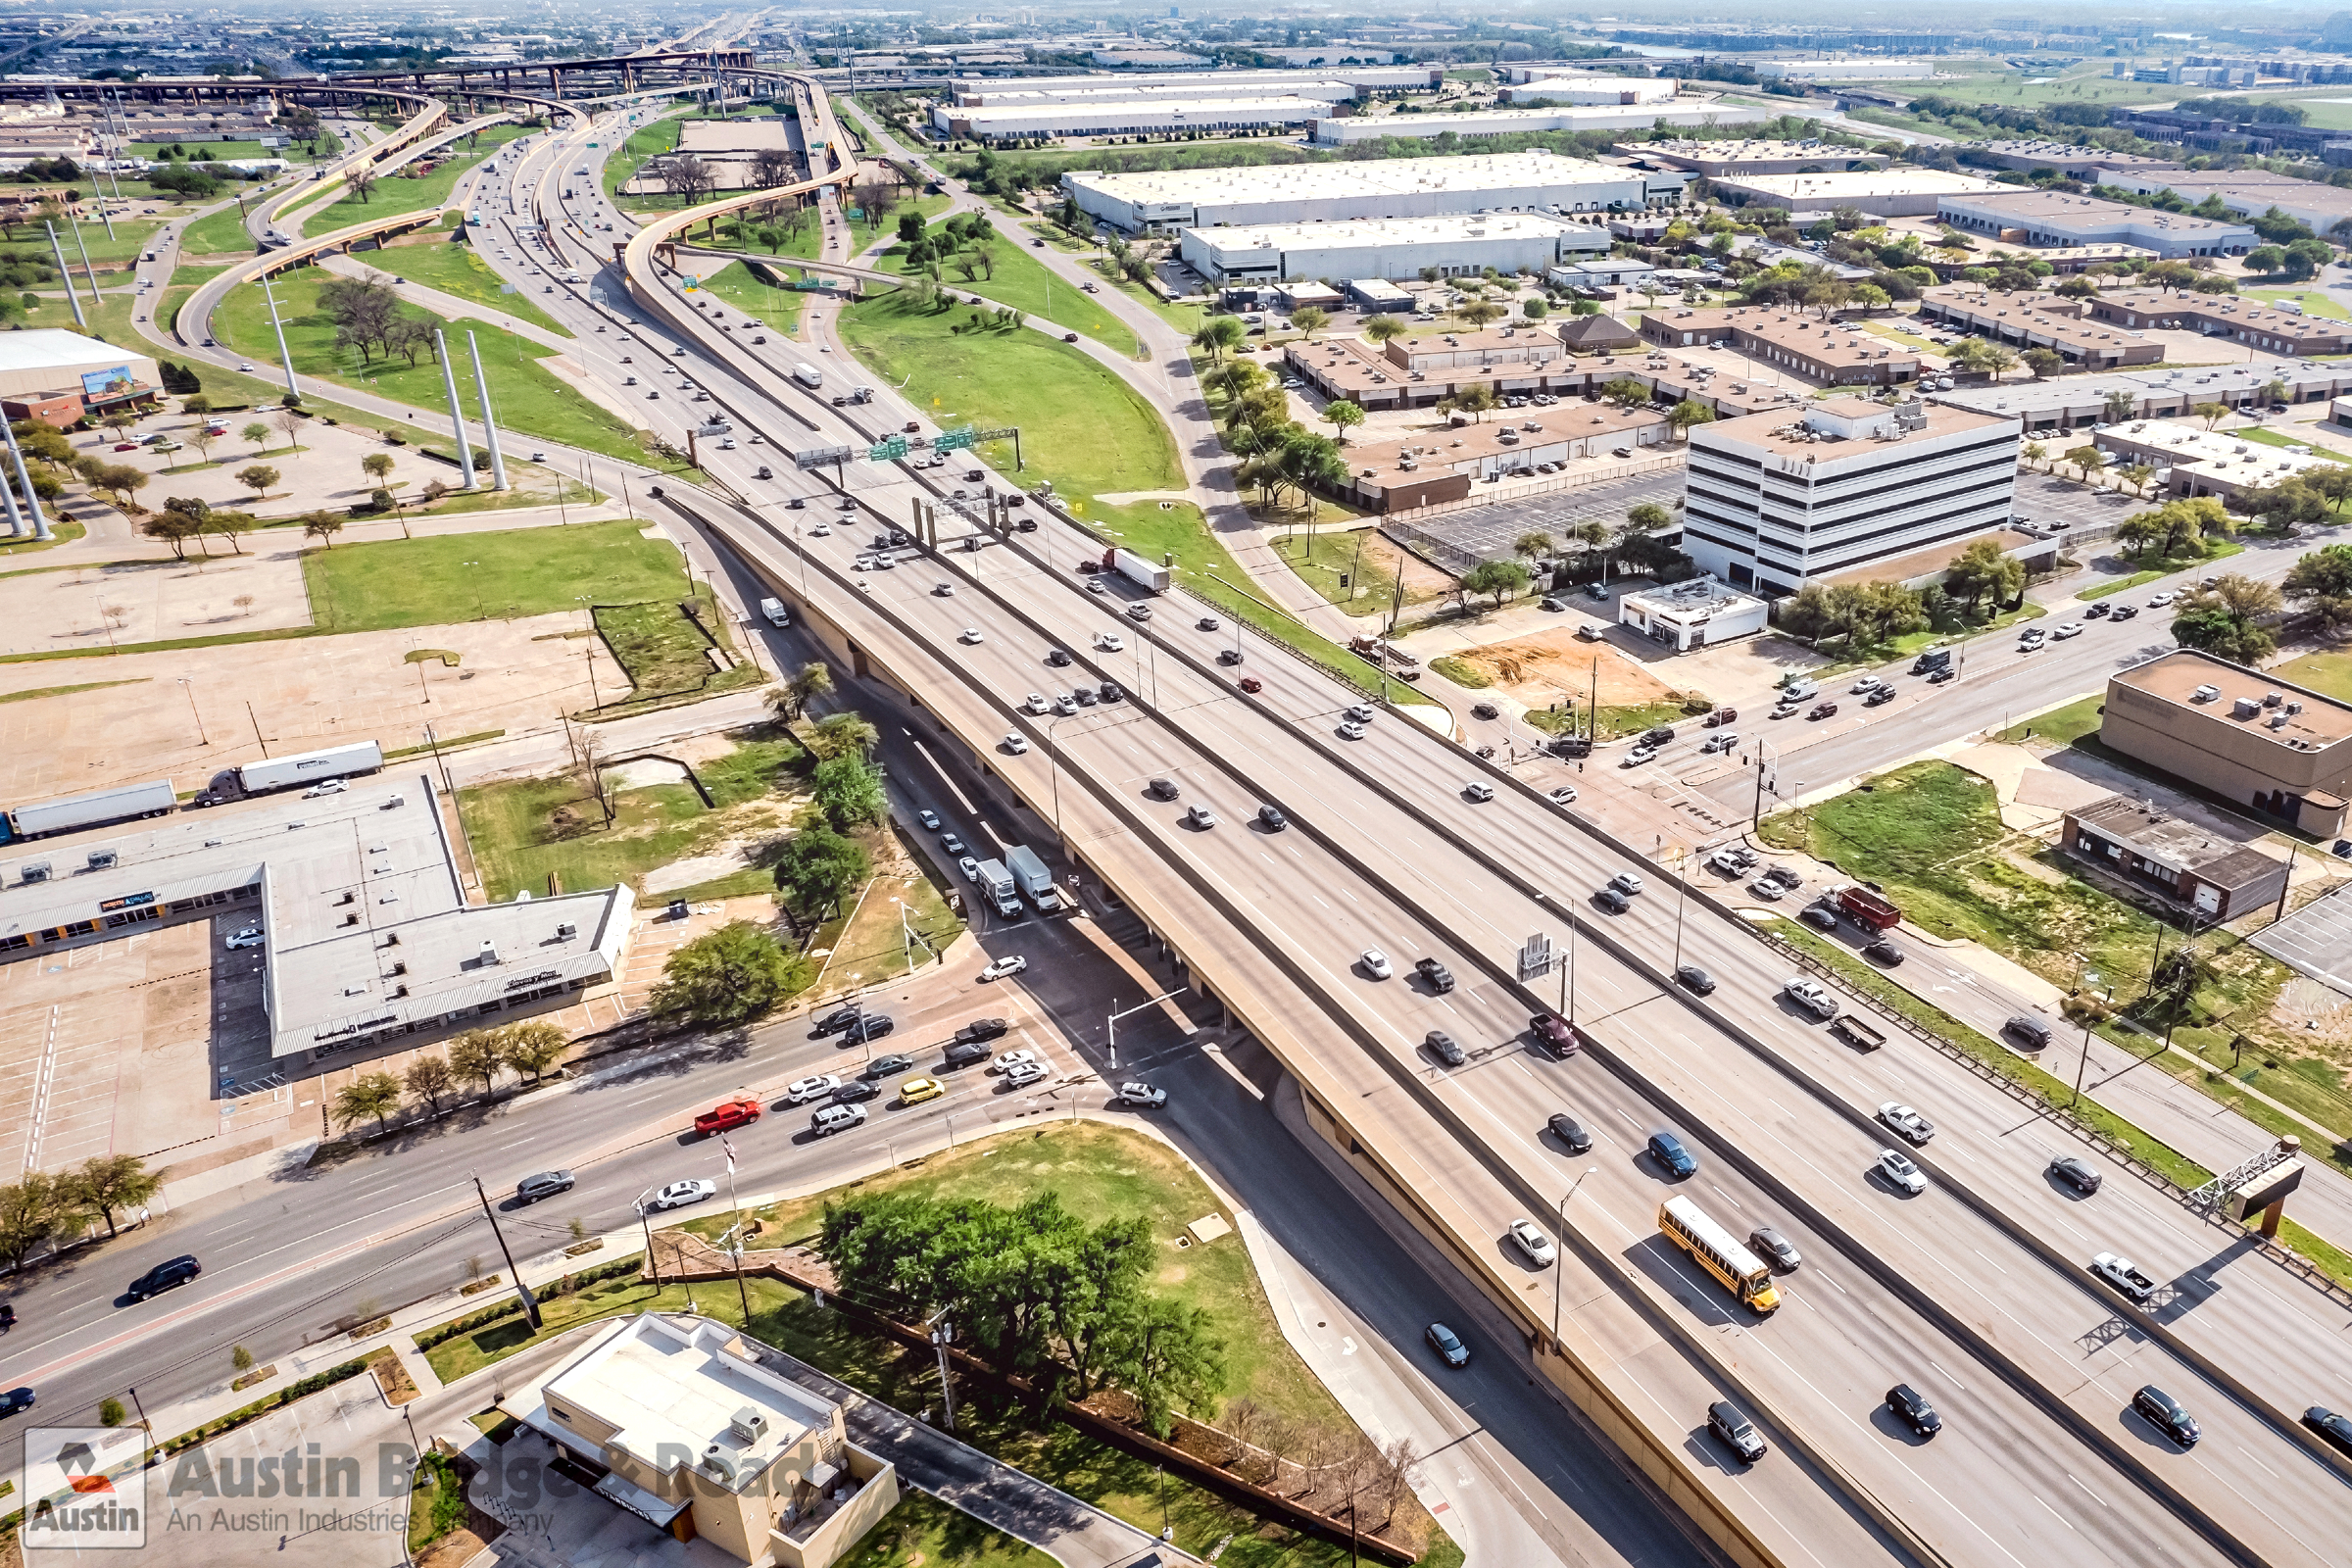 Ariel view of I-35 East Phase 2 Valley View